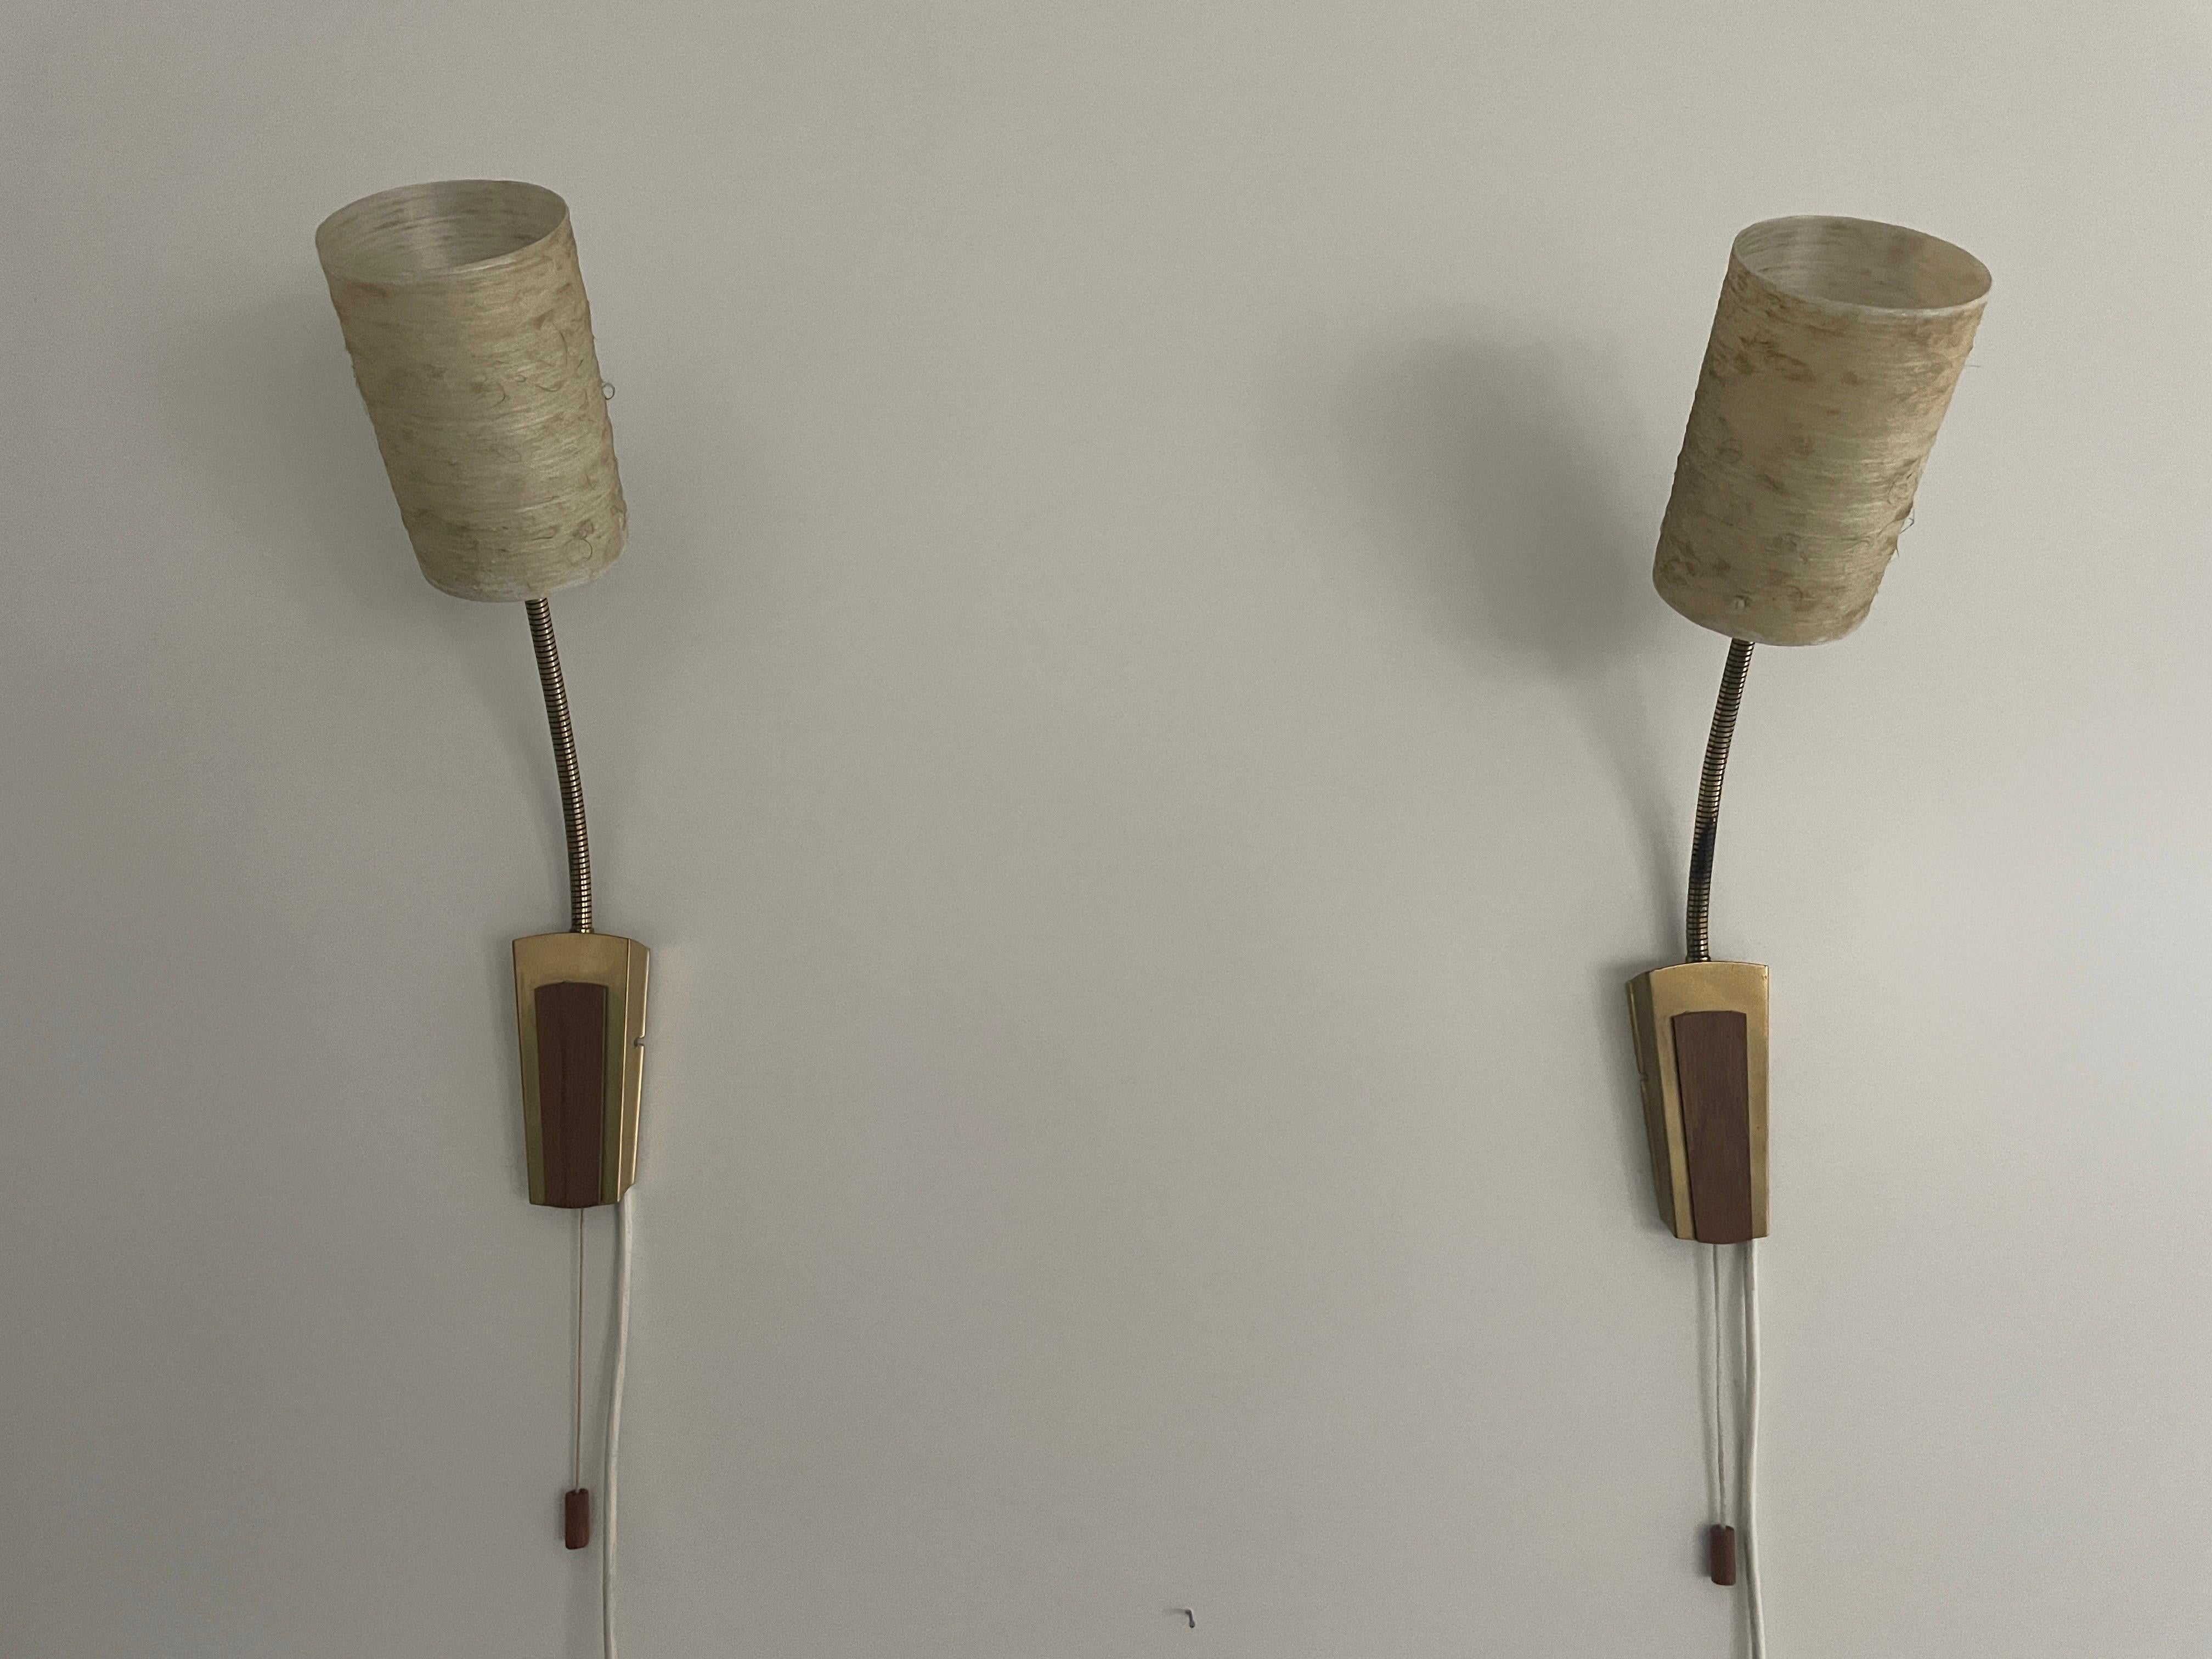 Fiberglass Shade Gooseneck Sconces, 1960s, Germany

Very elegant and Minimalist wall lamps
Lamp is in very good condition.


These lamps works with E14 standard light bulbs. 
Wired and suitable to use in all countries. (110-220 V)

Dimensions:
Open